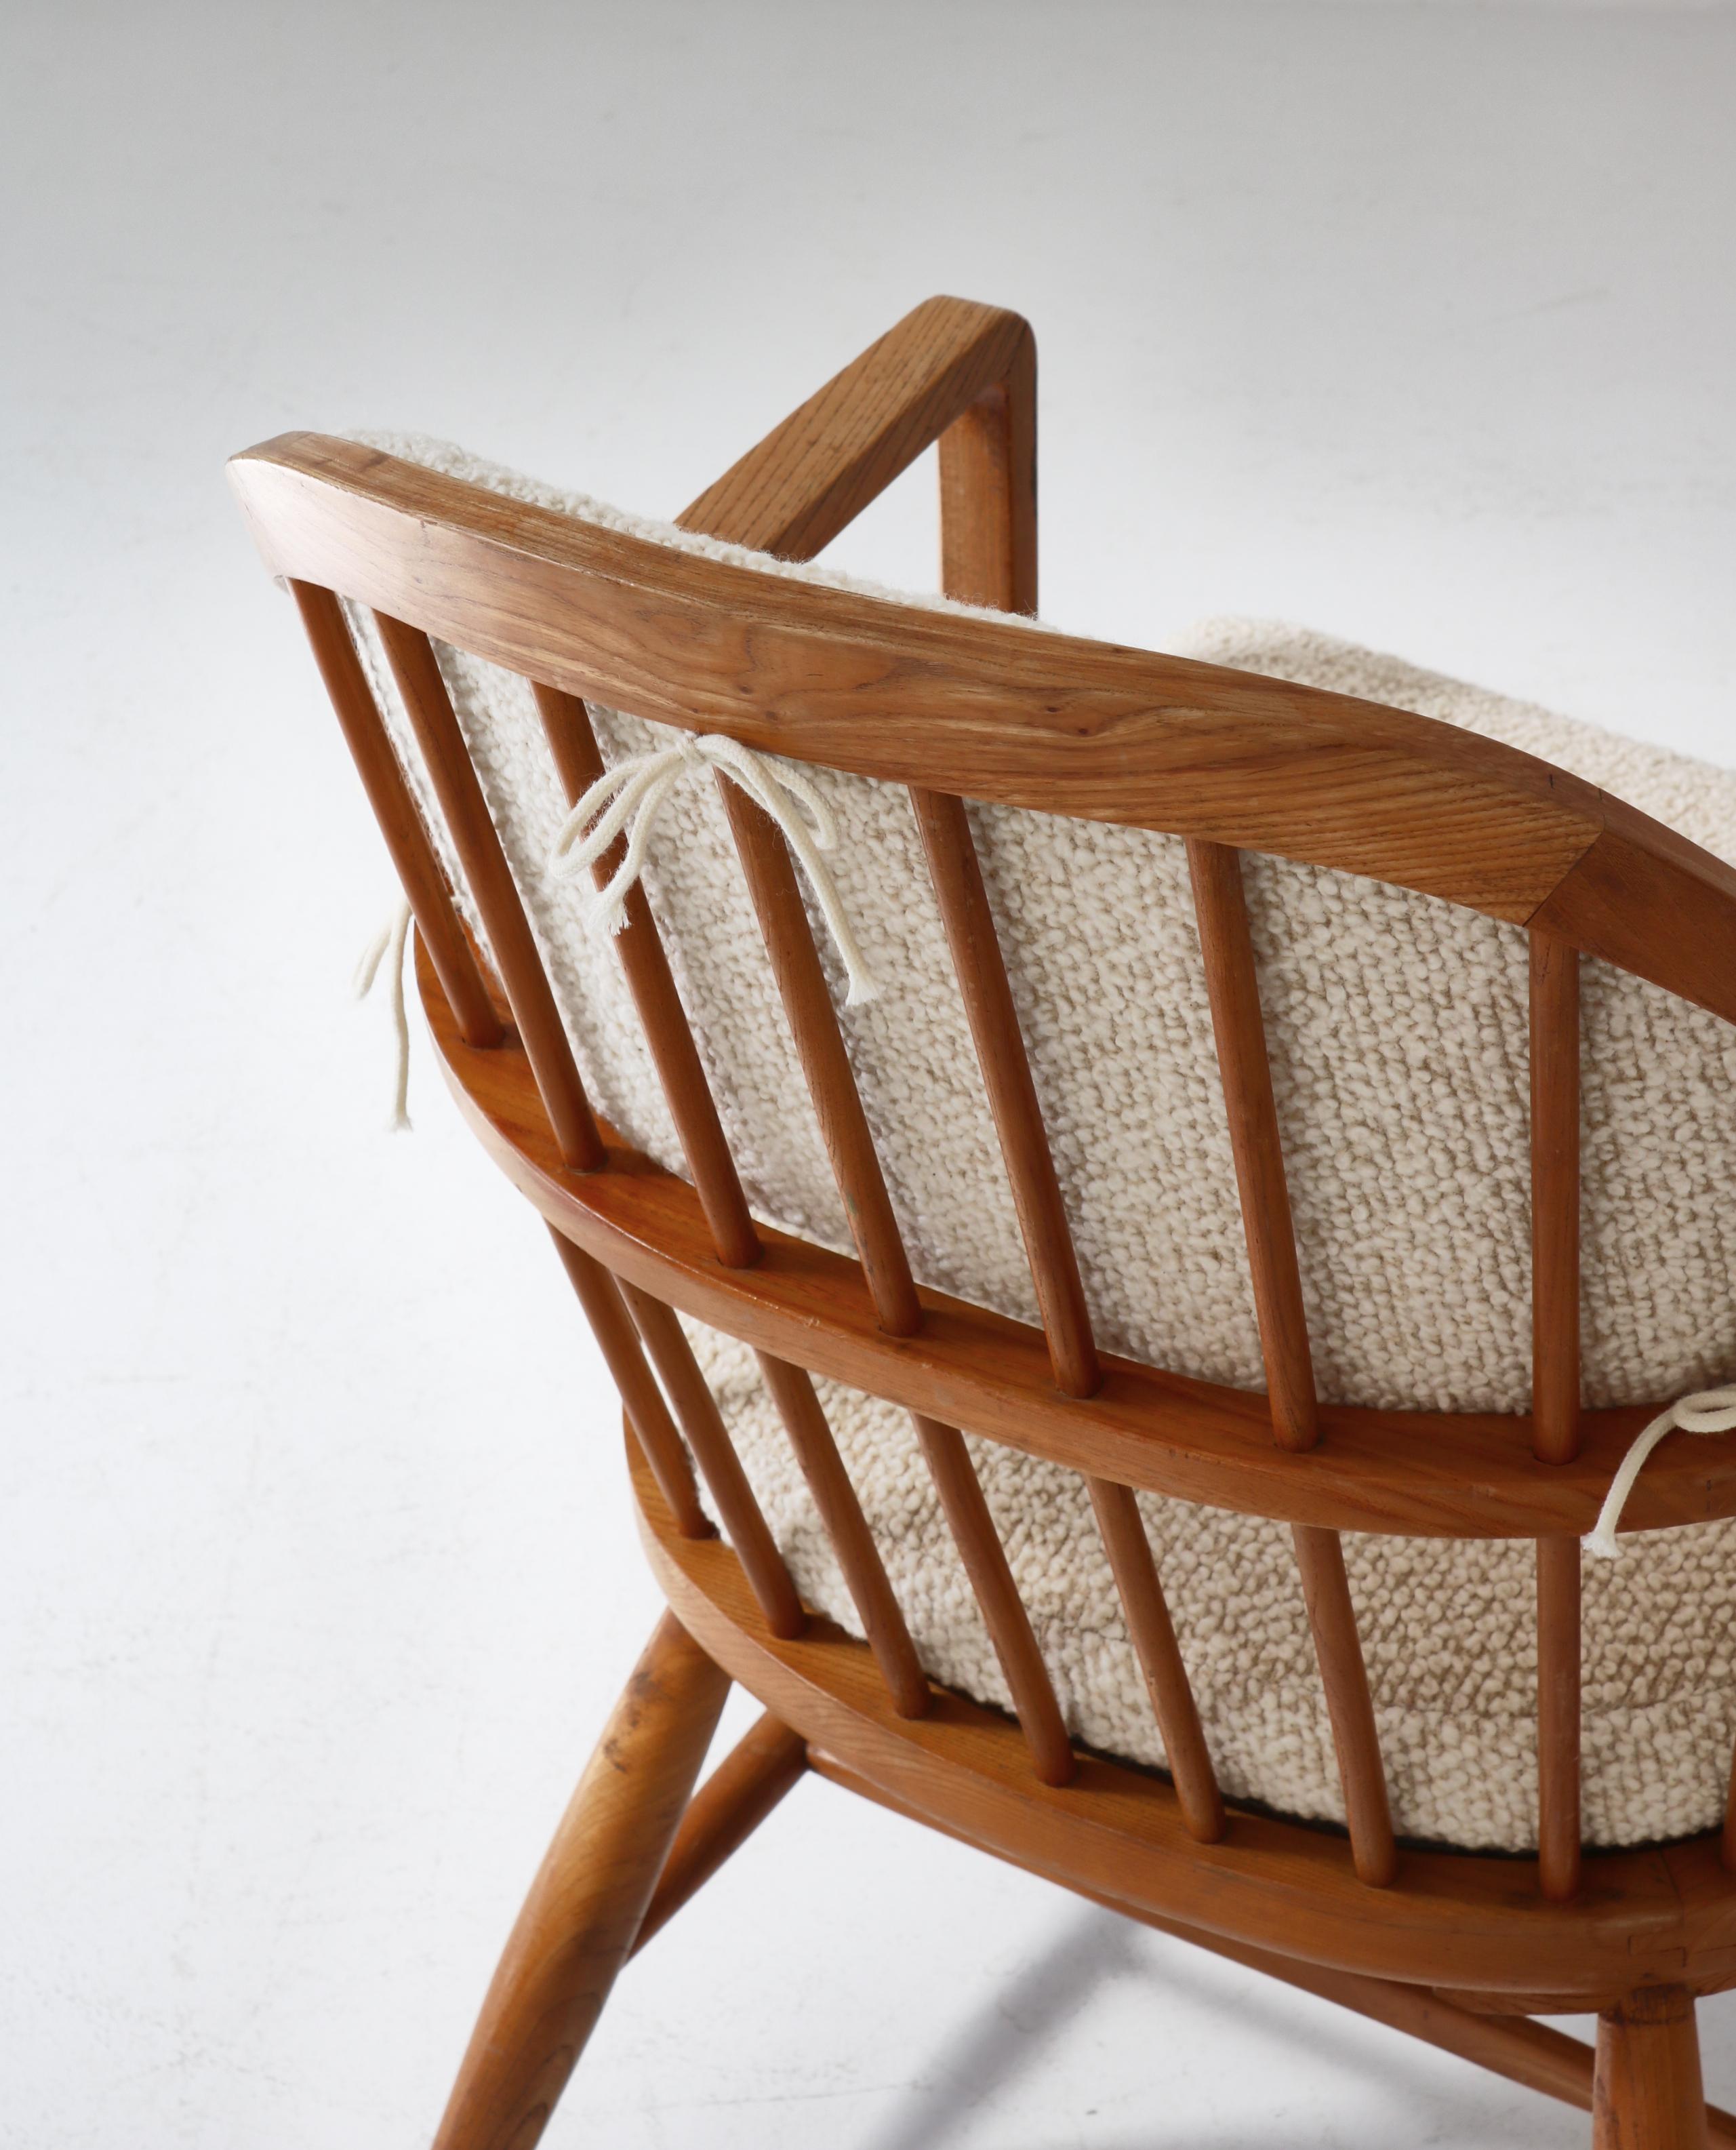 Mid-20th Century Scandinavian Modern Windsor Chair in Patinated Ash and White Bouclé, 1940s For Sale